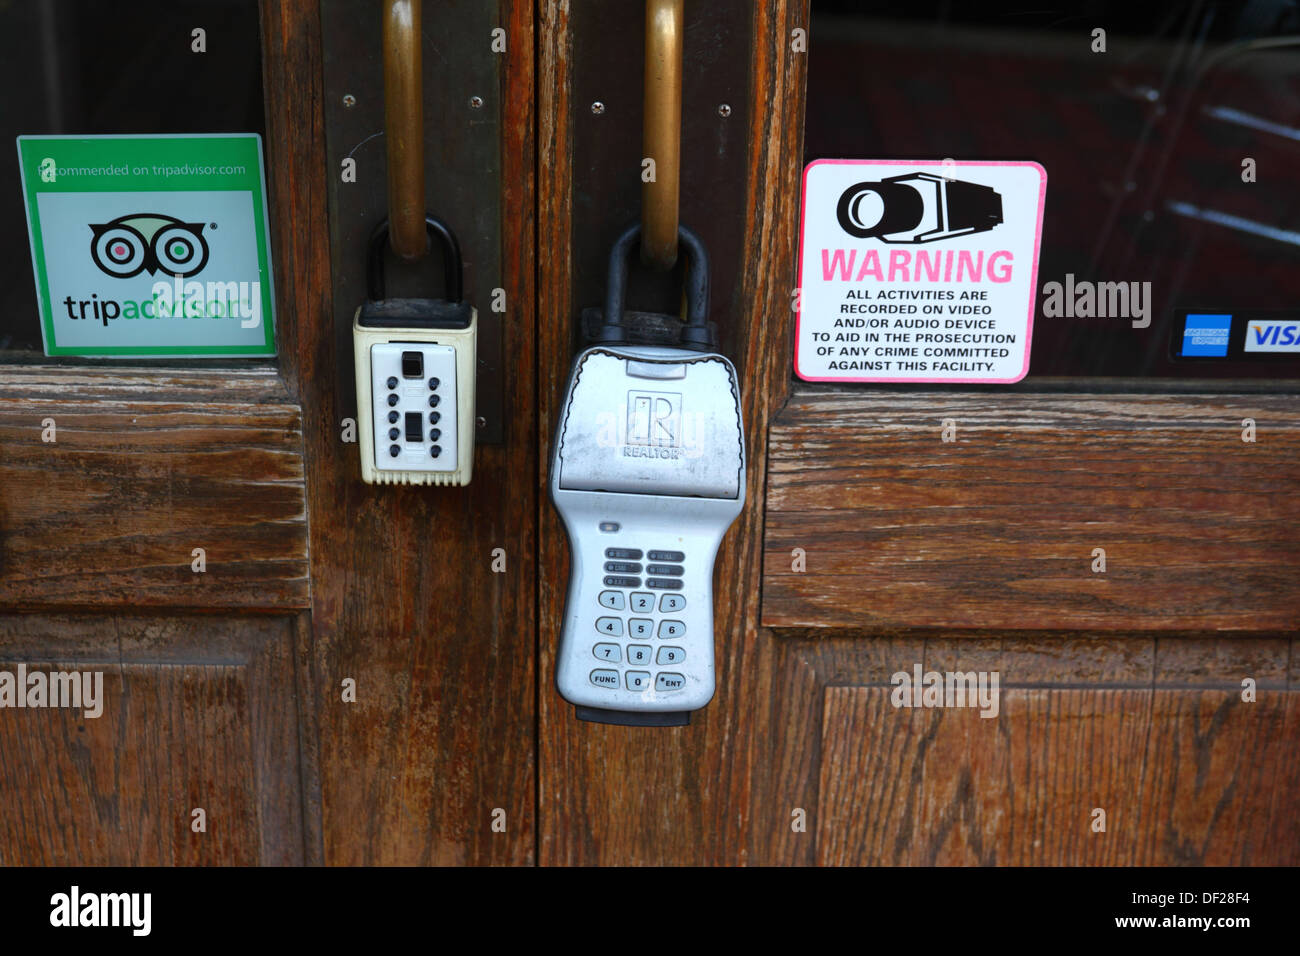 Combination padlocks and recommended by tripadvisor sticker on restaurant door, Baltimore, Maryland, USA Stock Photo